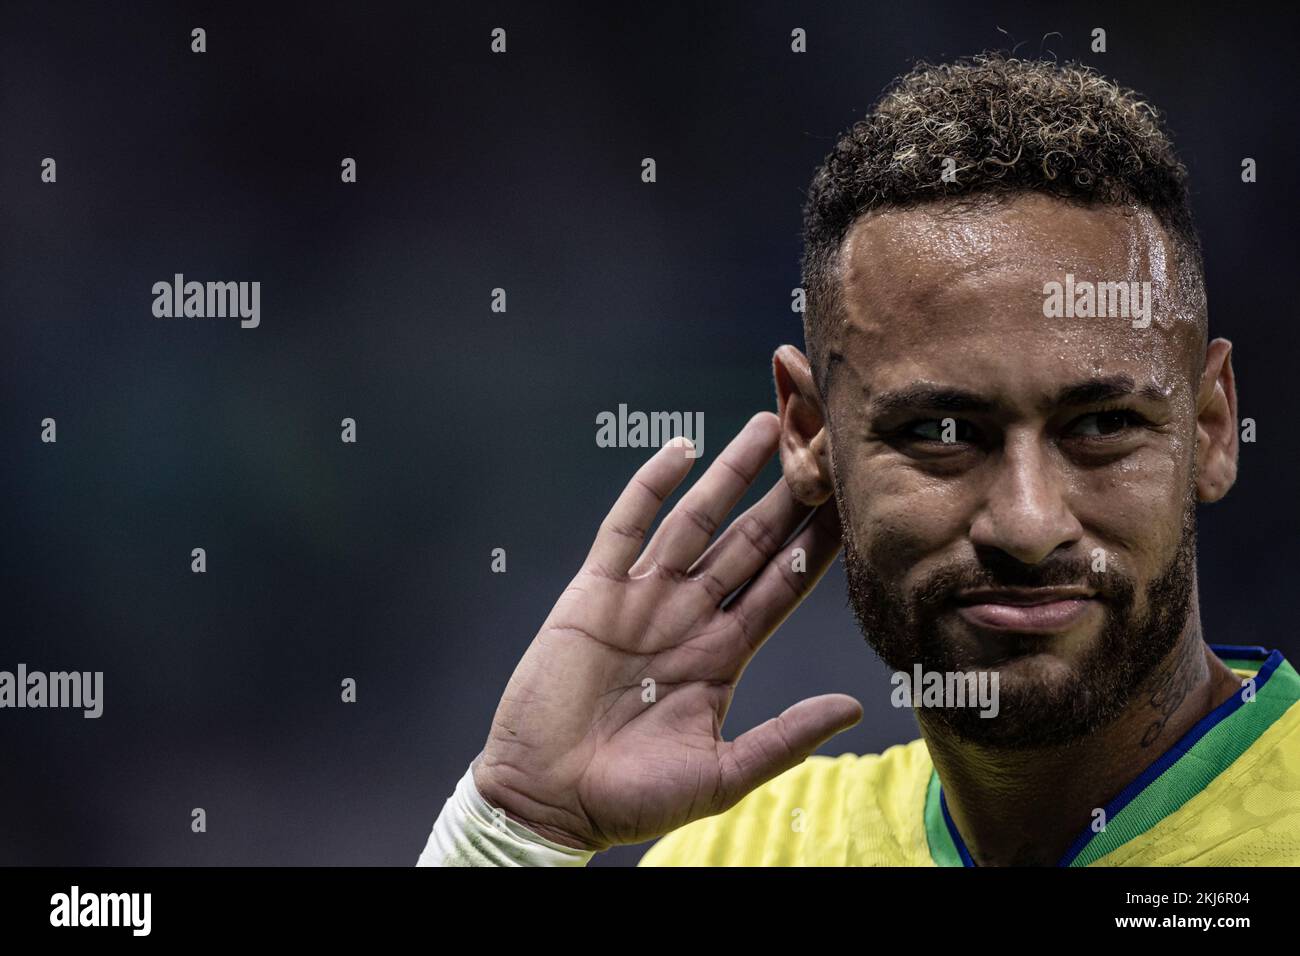 Al Wakrah, Brazil. 24th Nov, 2022. AC - Al-Wakrah - 11/24/2022 - 2022 WORLD CUP, BRAZIL X SERBIA - Neymar player from Serbia during a match against Brazil at the Lusail stadium for the 2022 World Cup championship. Photo: Pedro Martins/AGIF/Sipa USA Credit: Sipa USA/Alamy Live News Stock Photo